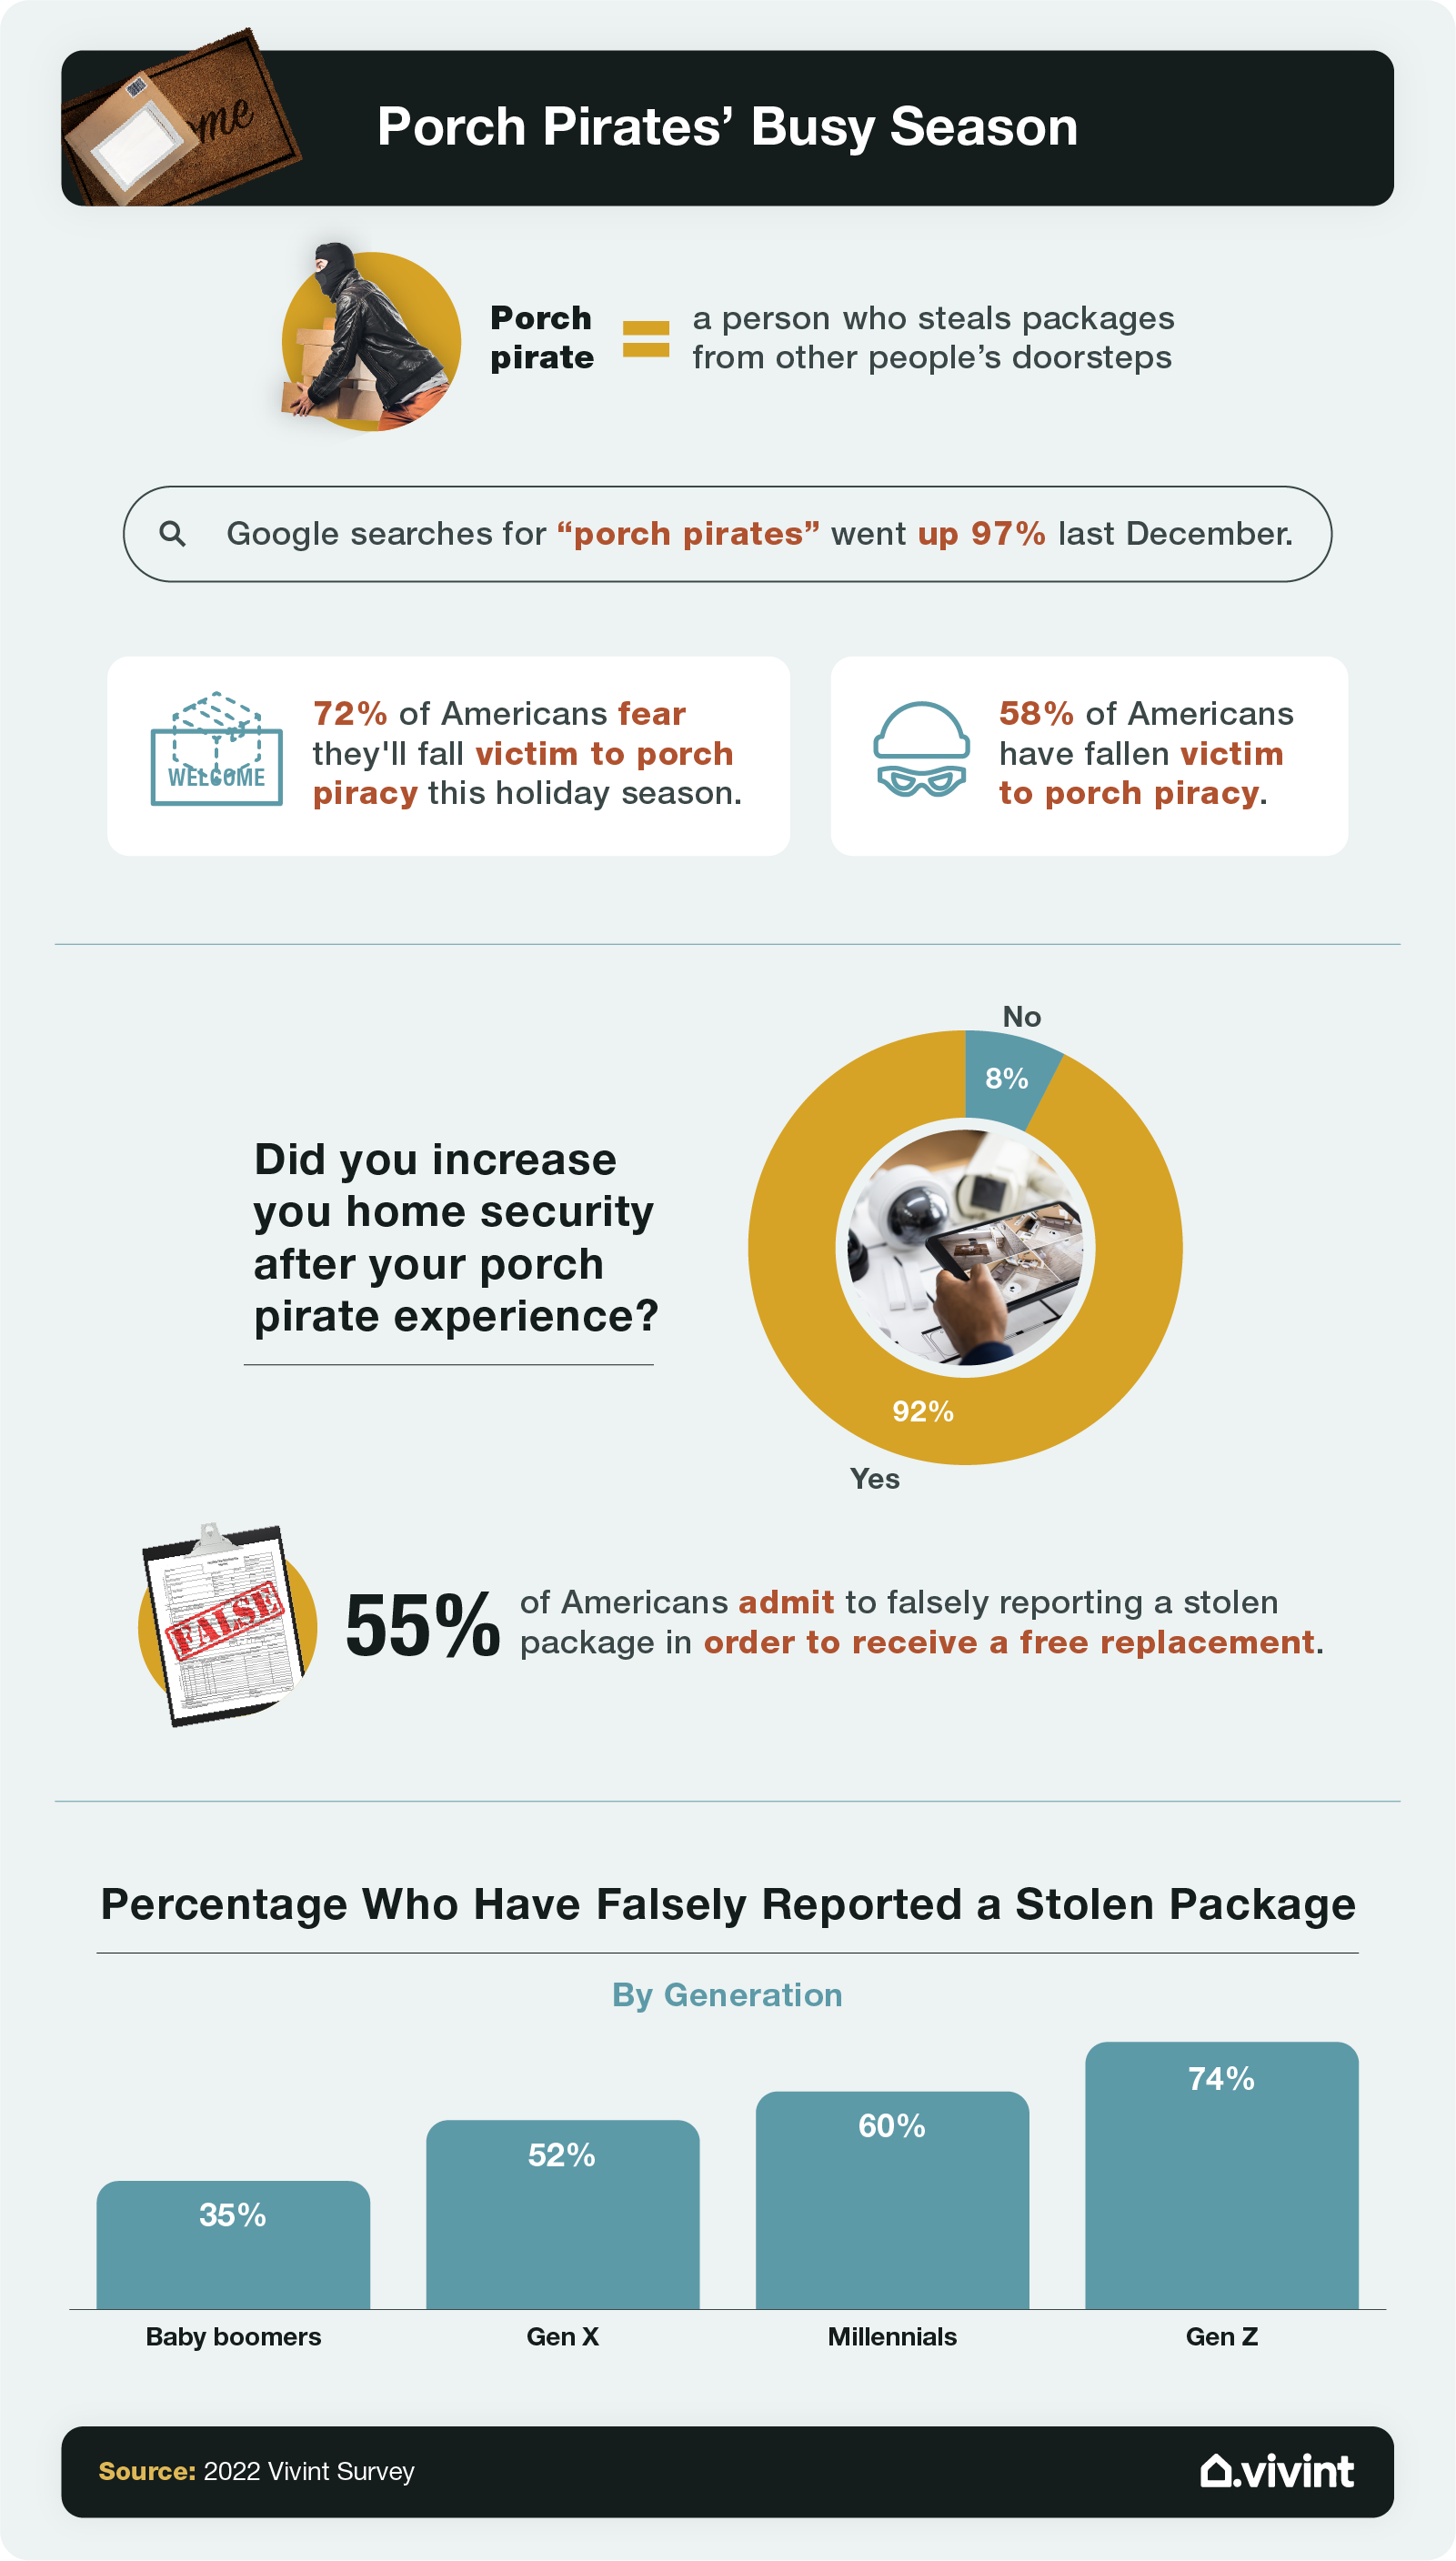 Information about porch pirate theft in the holiday season.